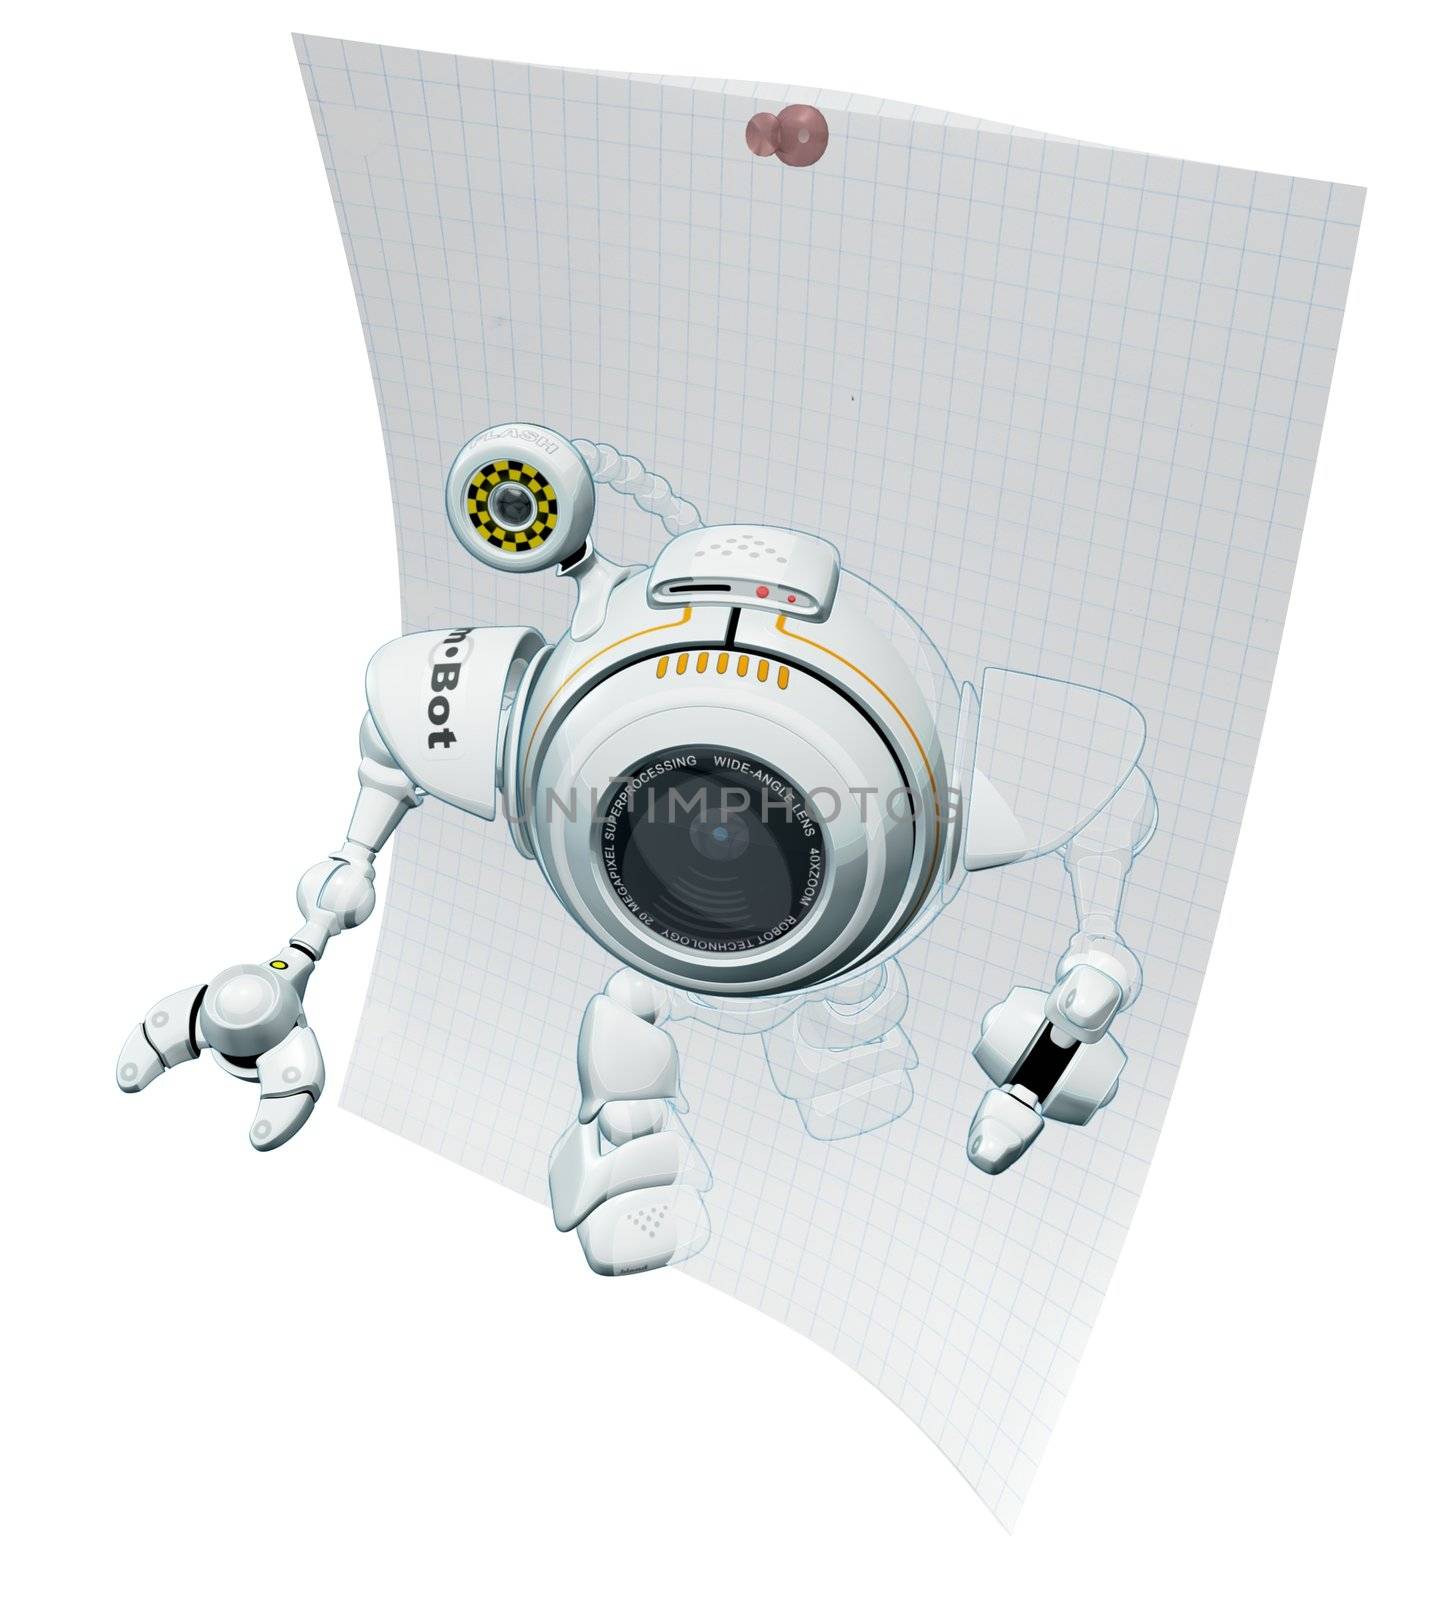 A 3d robot web cam emerging from graph paper with technical drawings behind him. 
The labels and markings on him are all fictional and made up. 